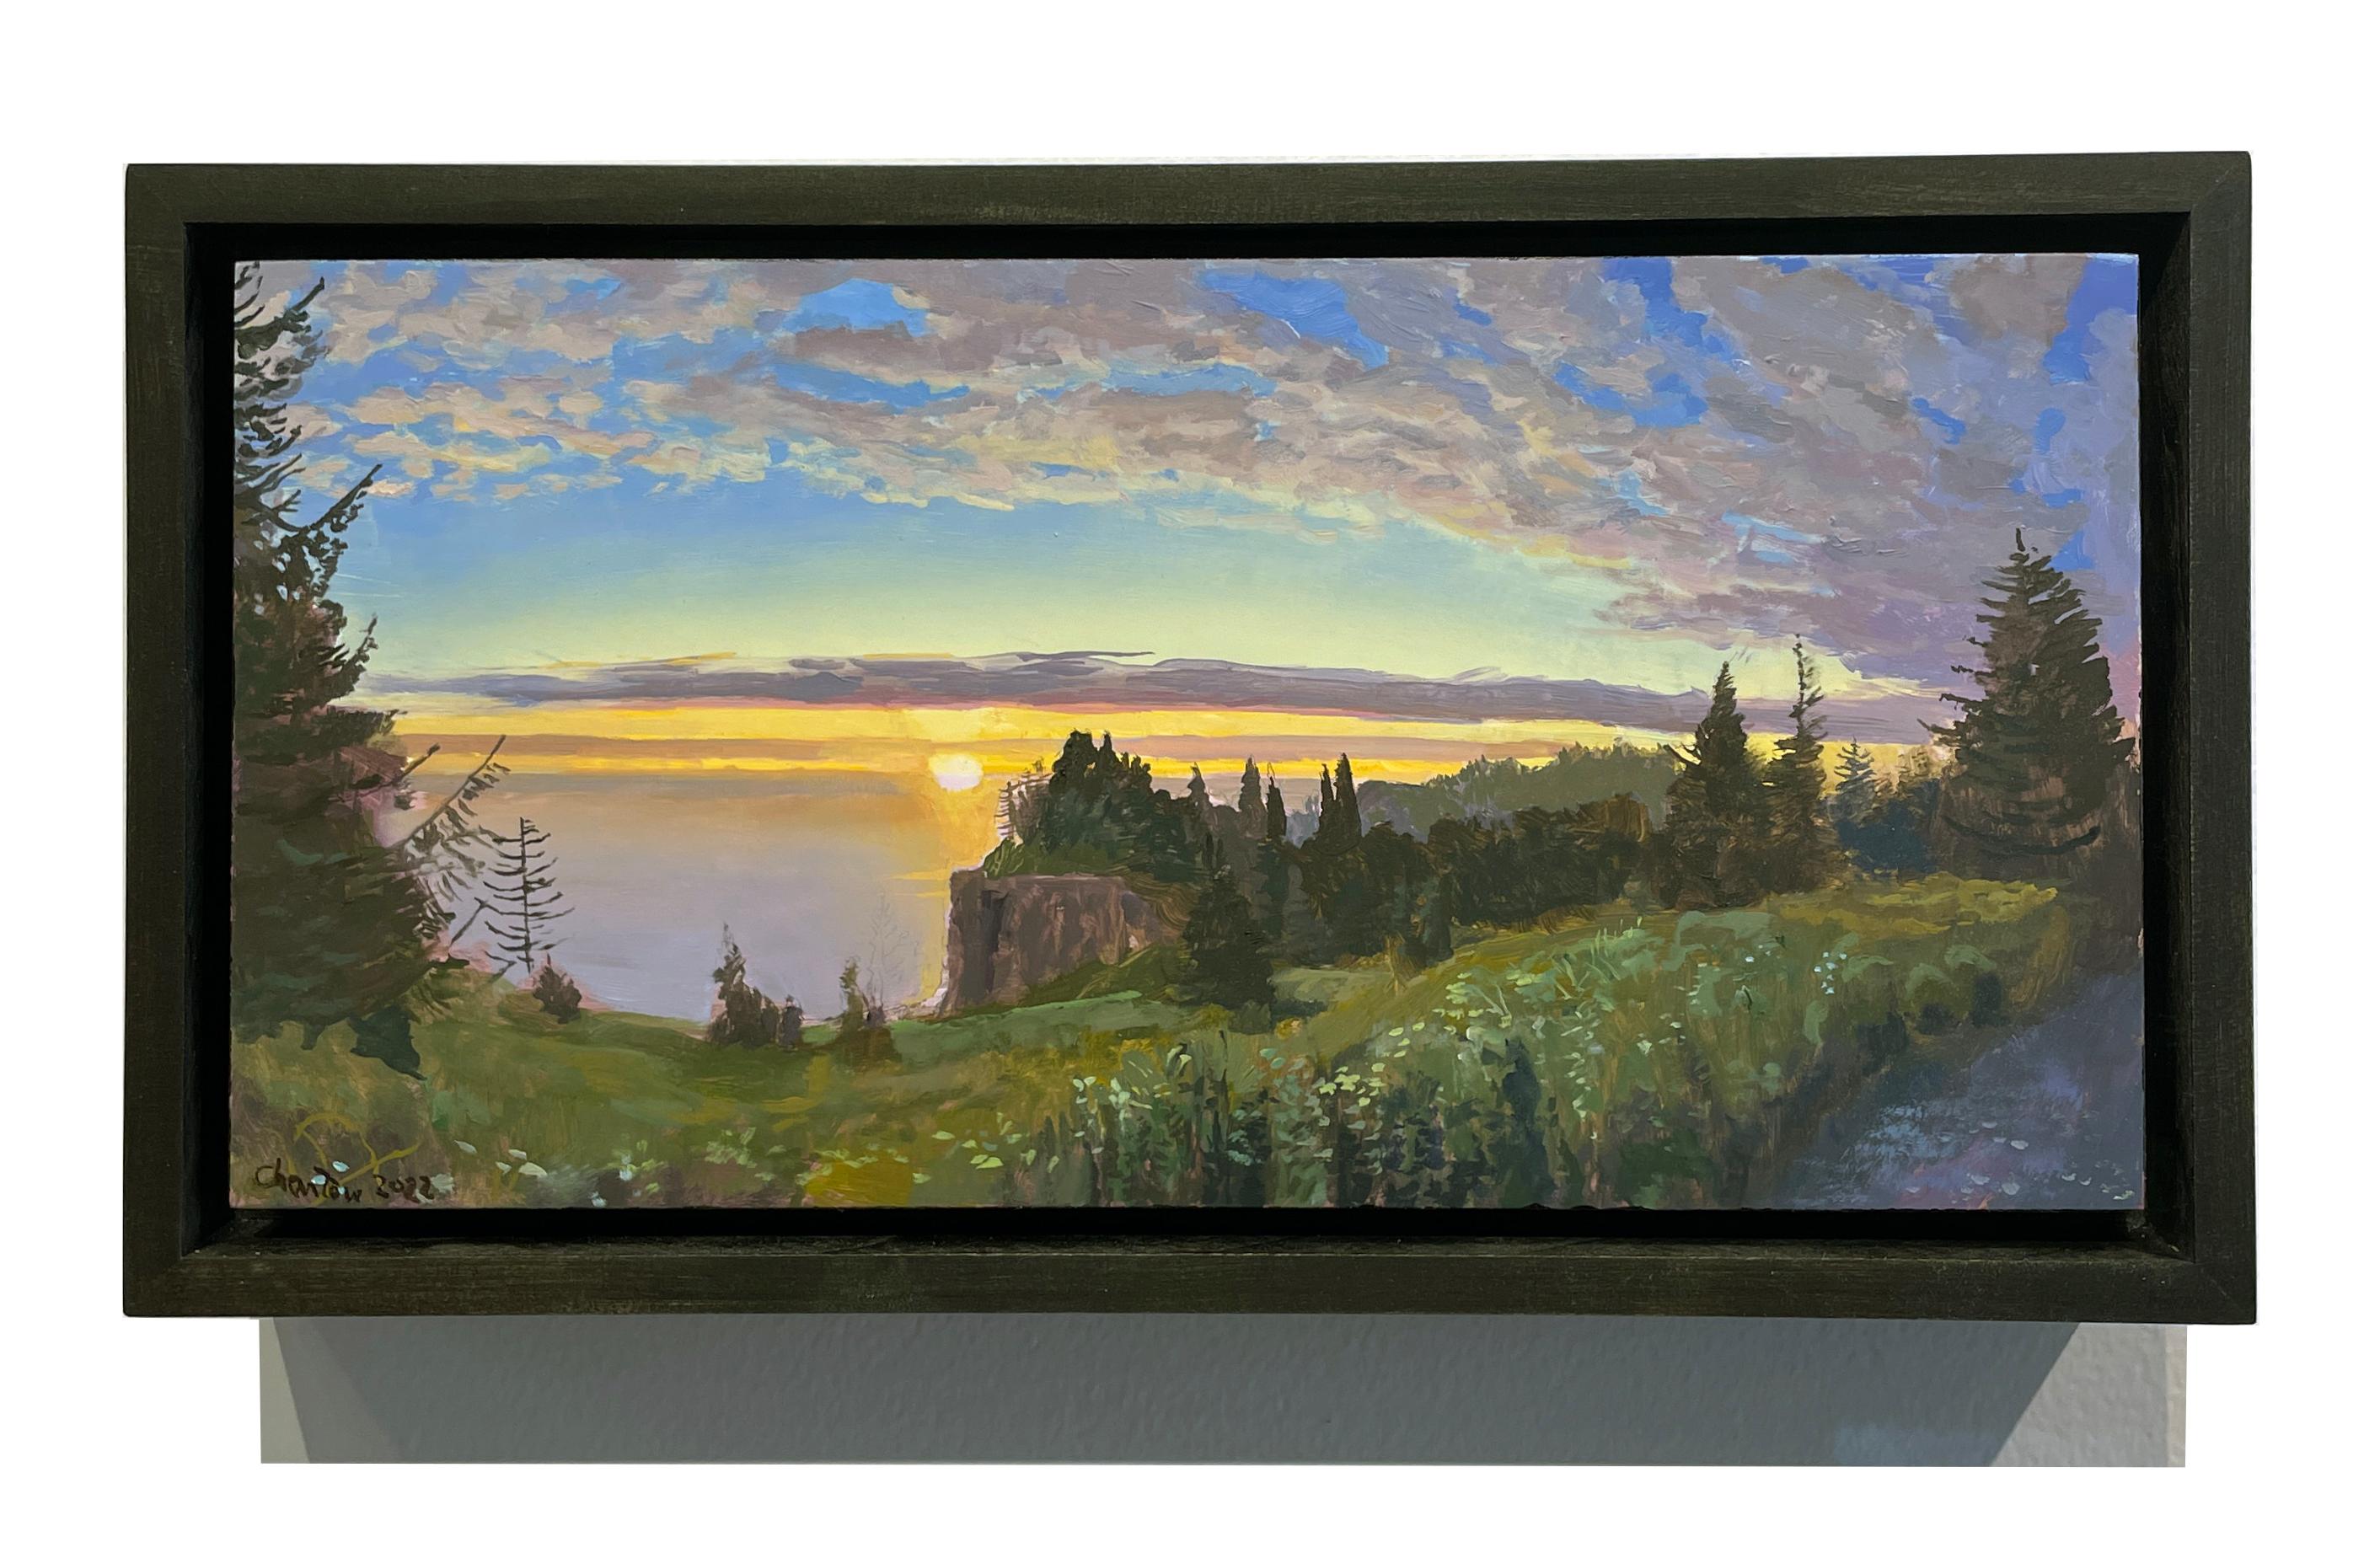 Arch Cape - Oregon, Wooded Landscape, Setting Sun and Ocean View, Oil on Panel